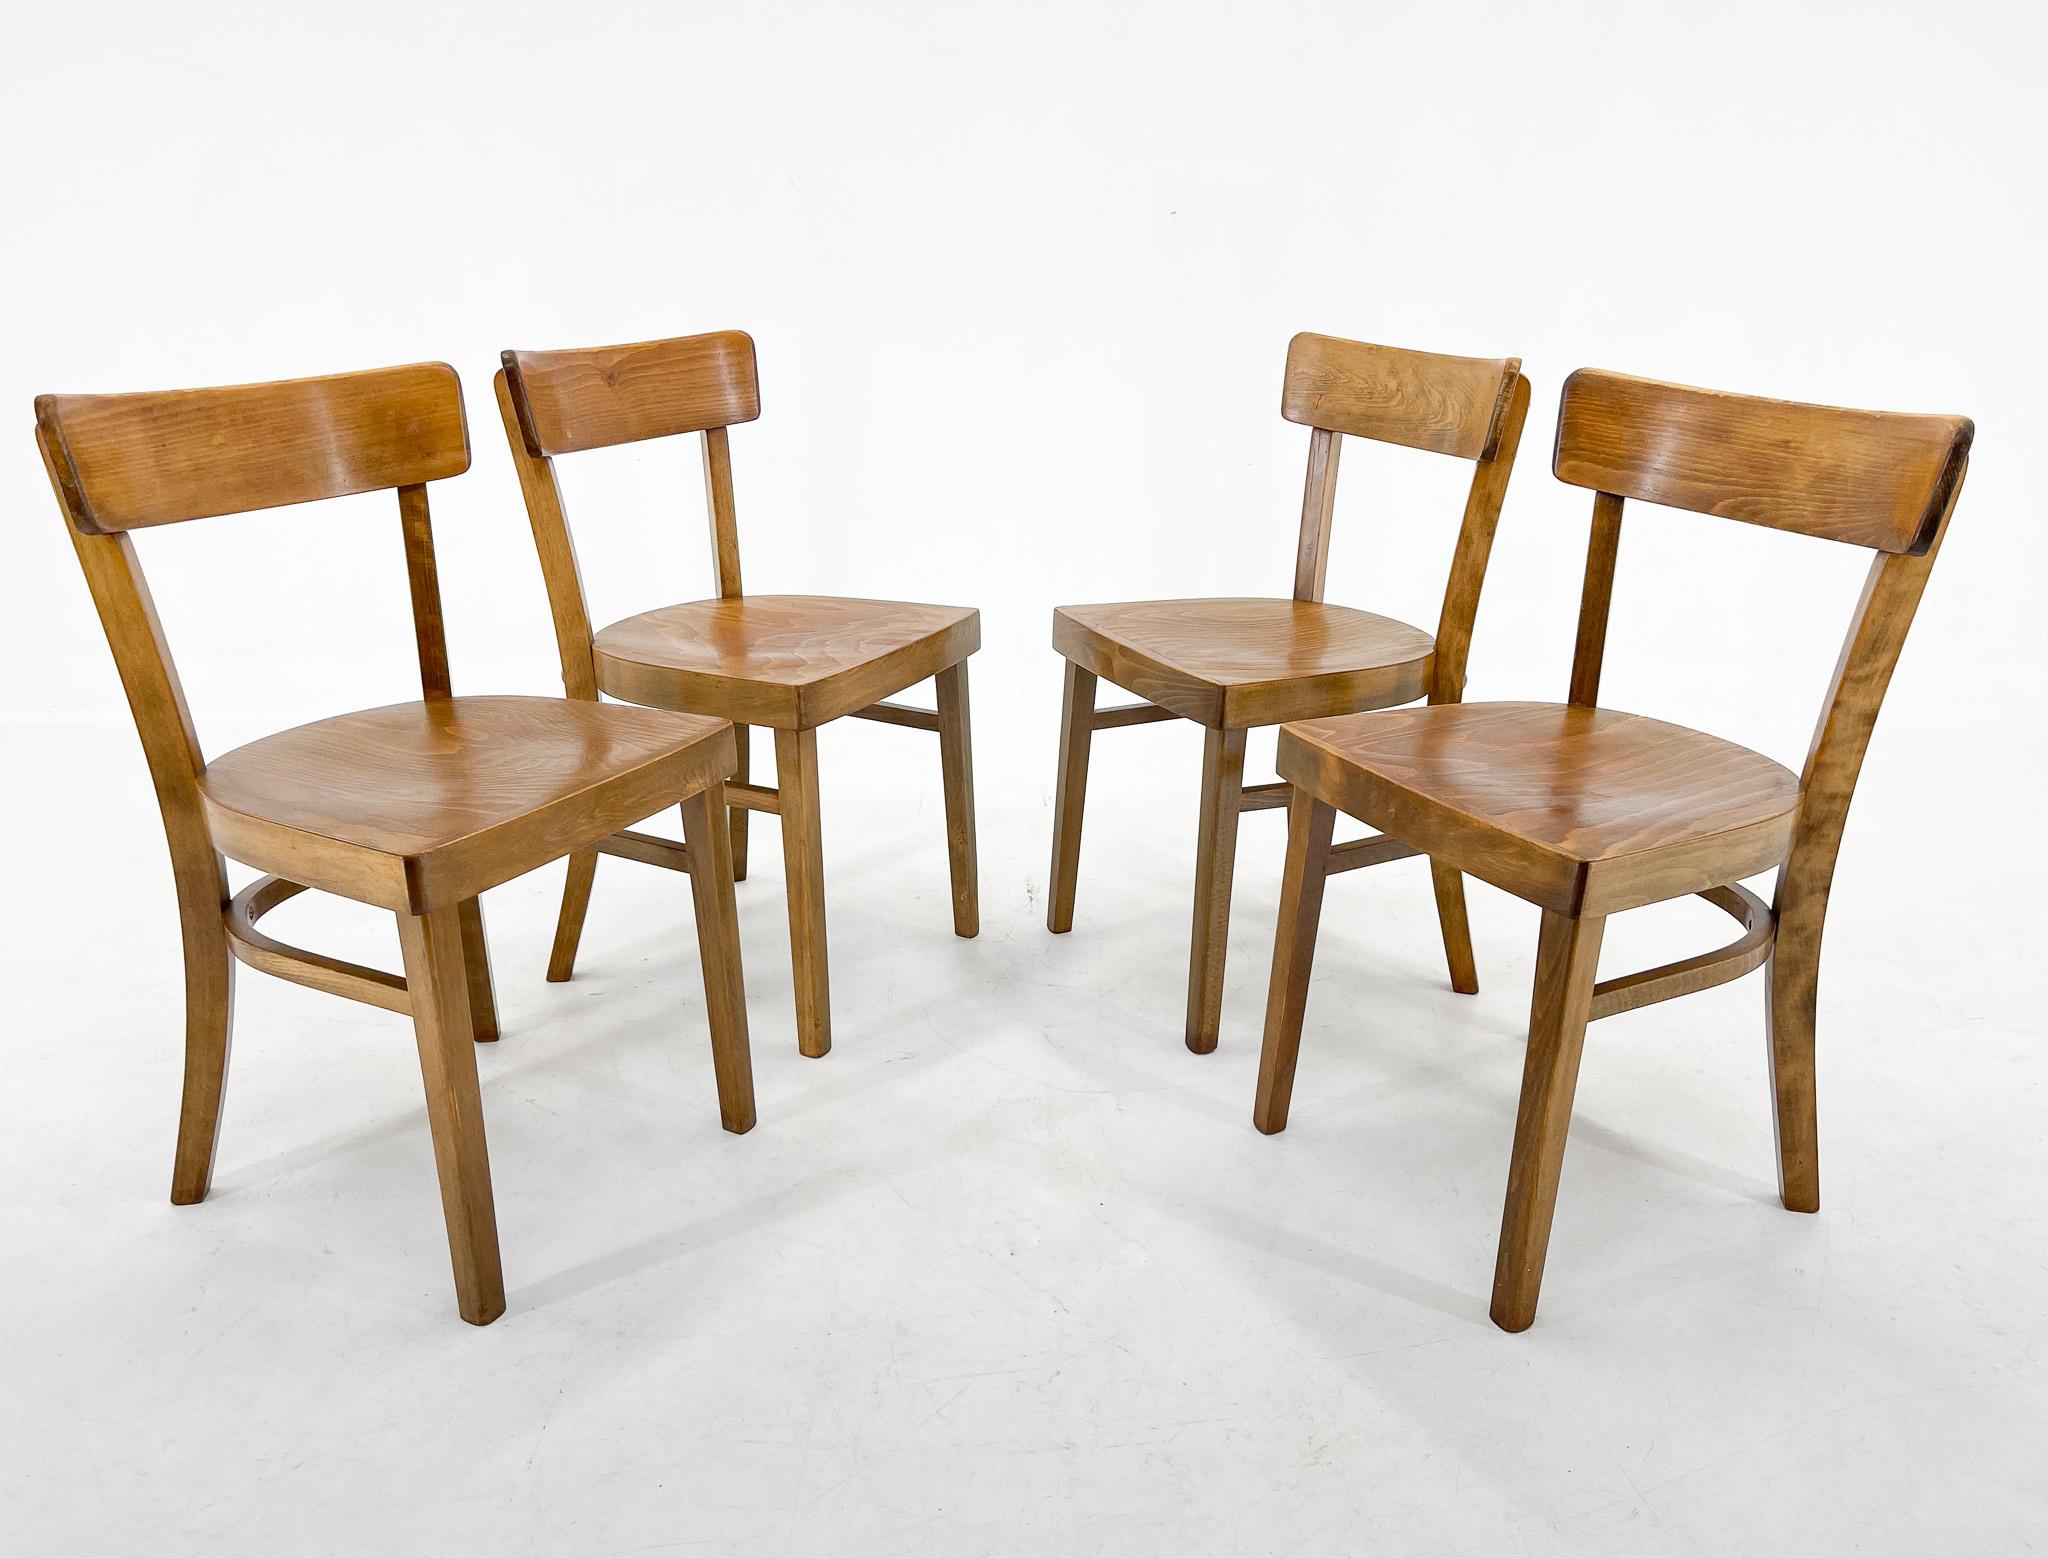 20th Century Set of Four Wooden Ton Chairs, Czechoslovakia, 1960s For Sale